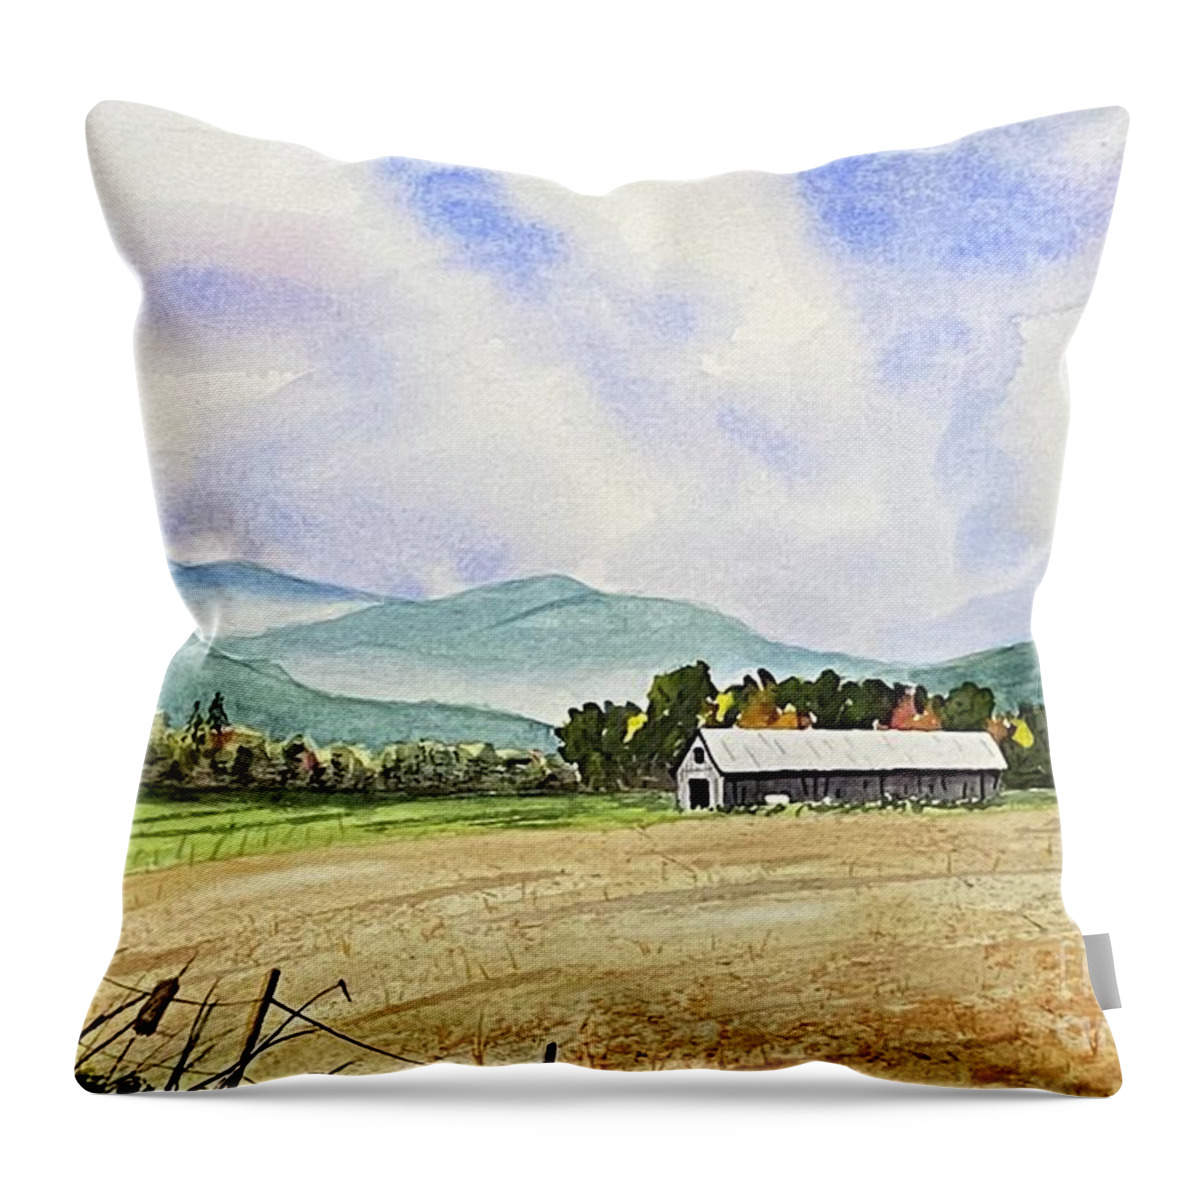 Barn Throw Pillow featuring the painting Foothills Barn by Joseph Burger